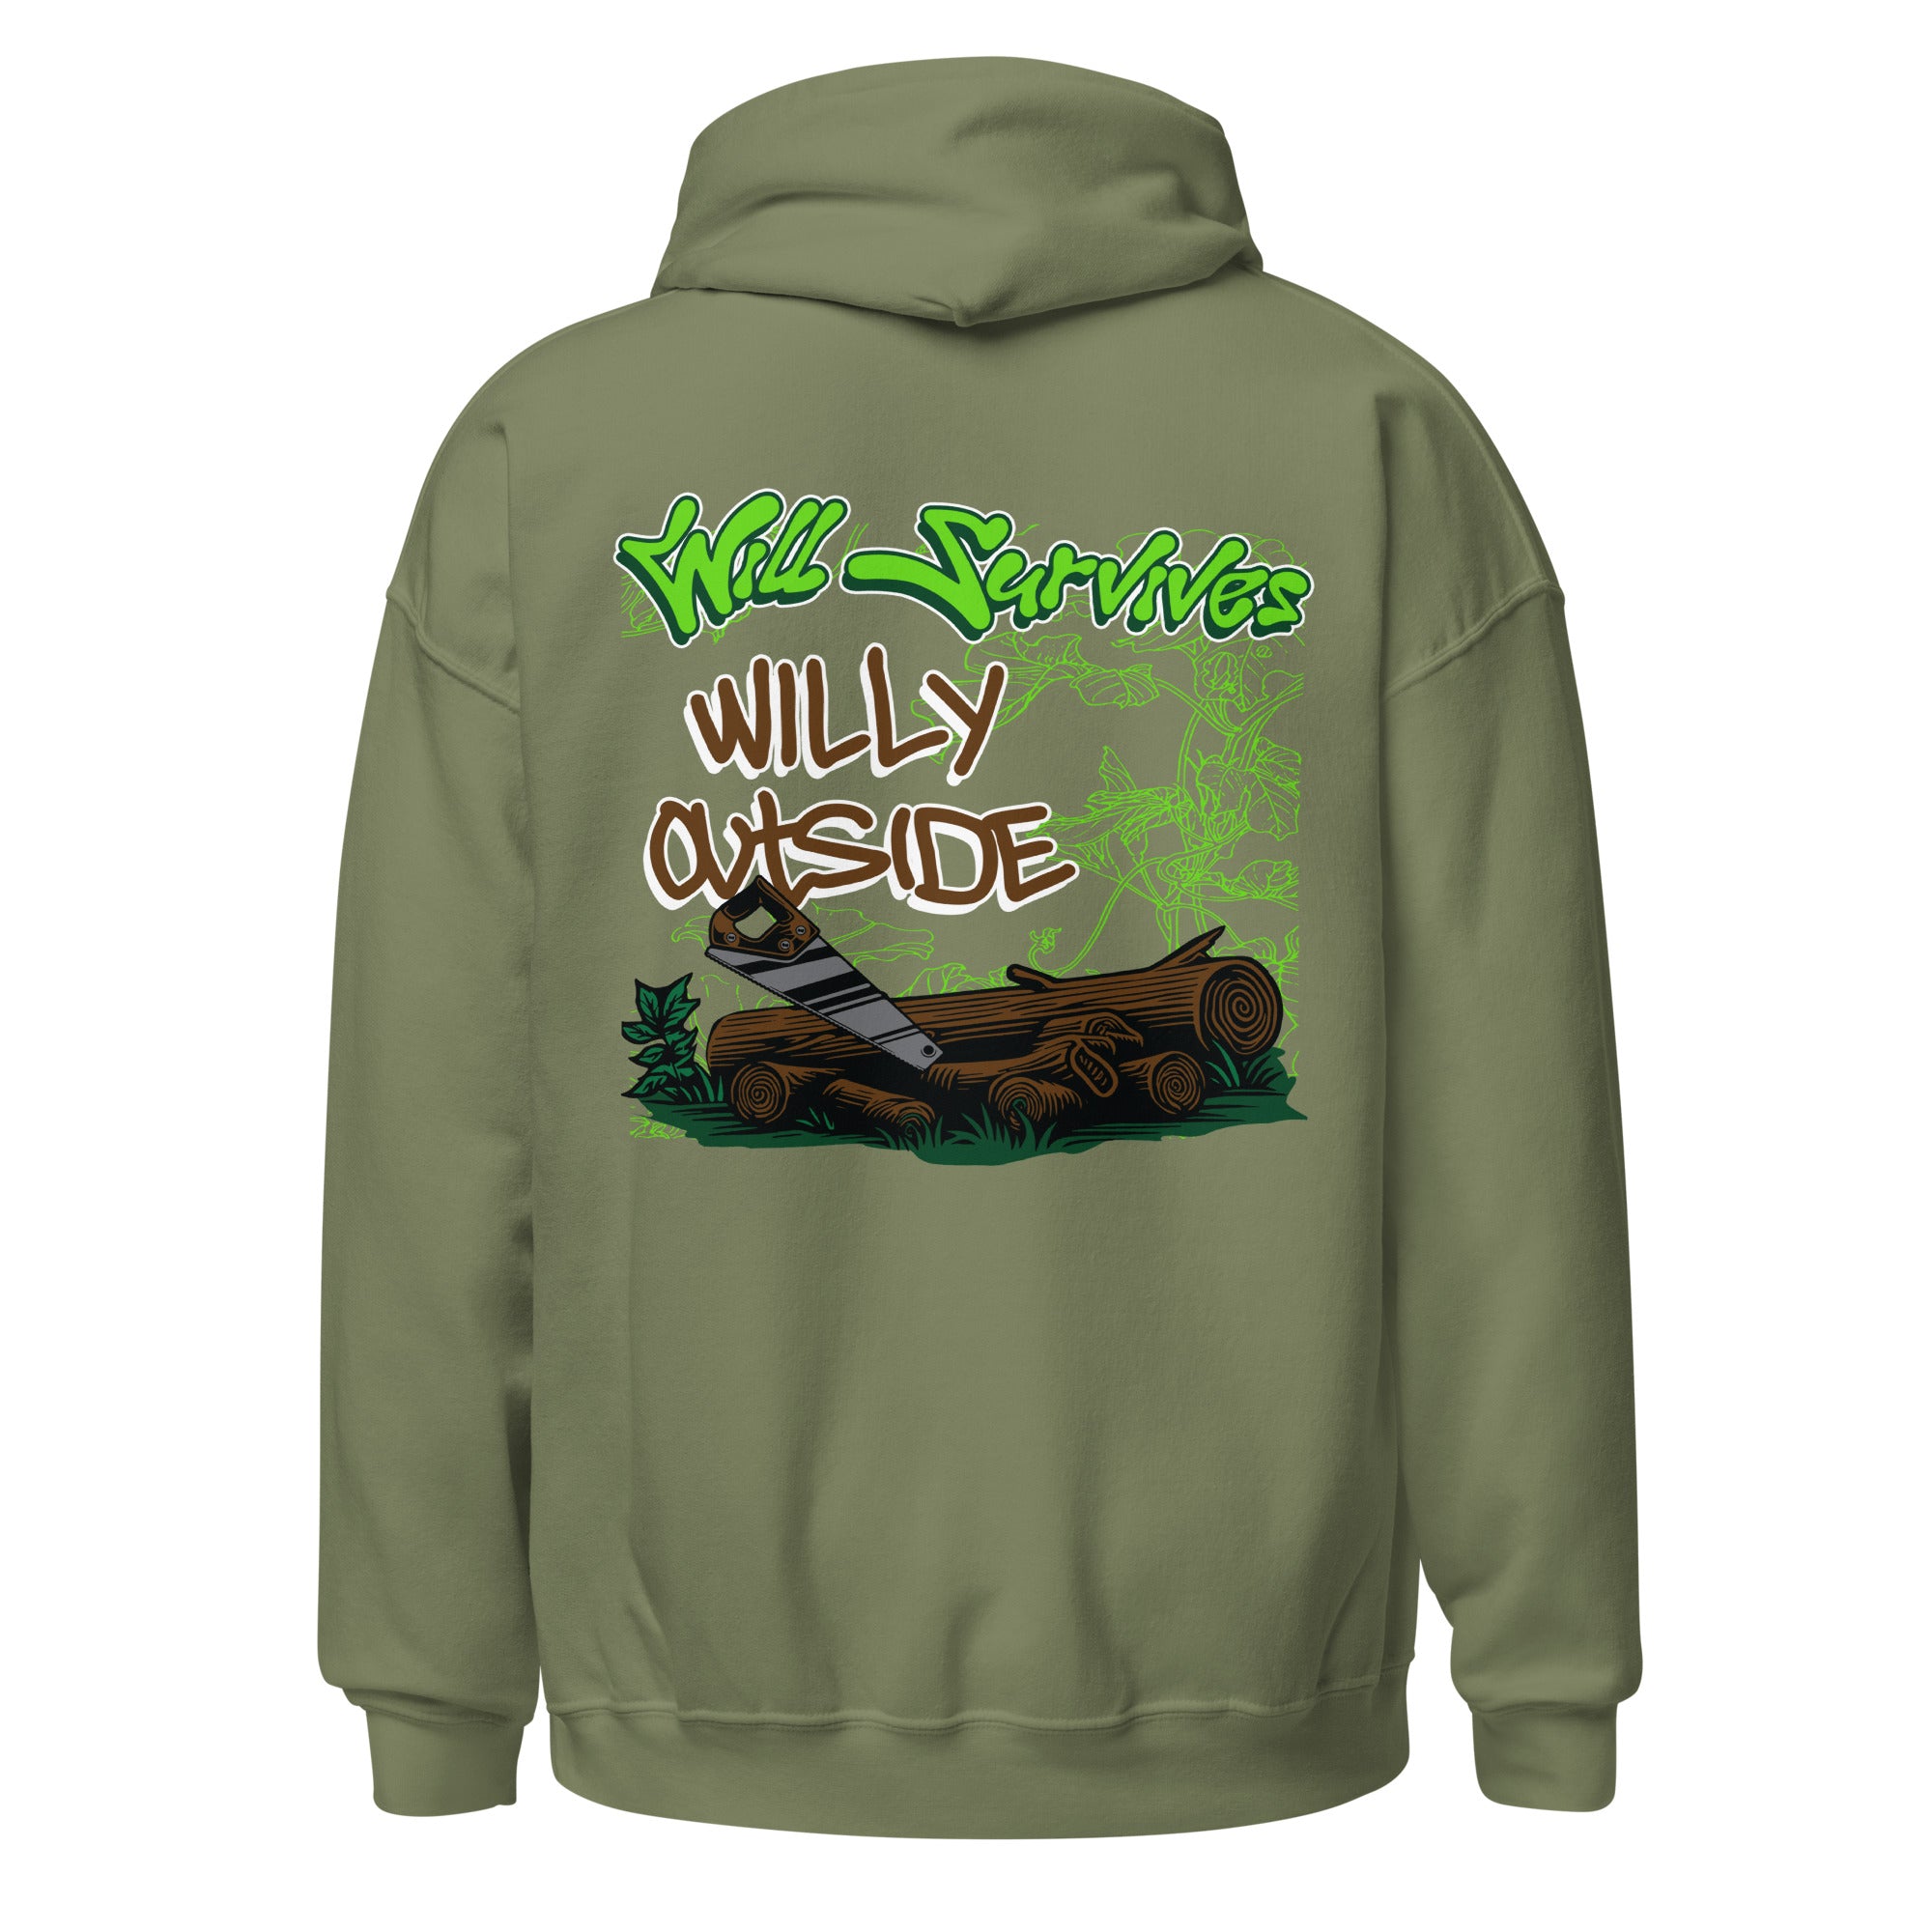 "WILLY OUTSIDE" hoodie